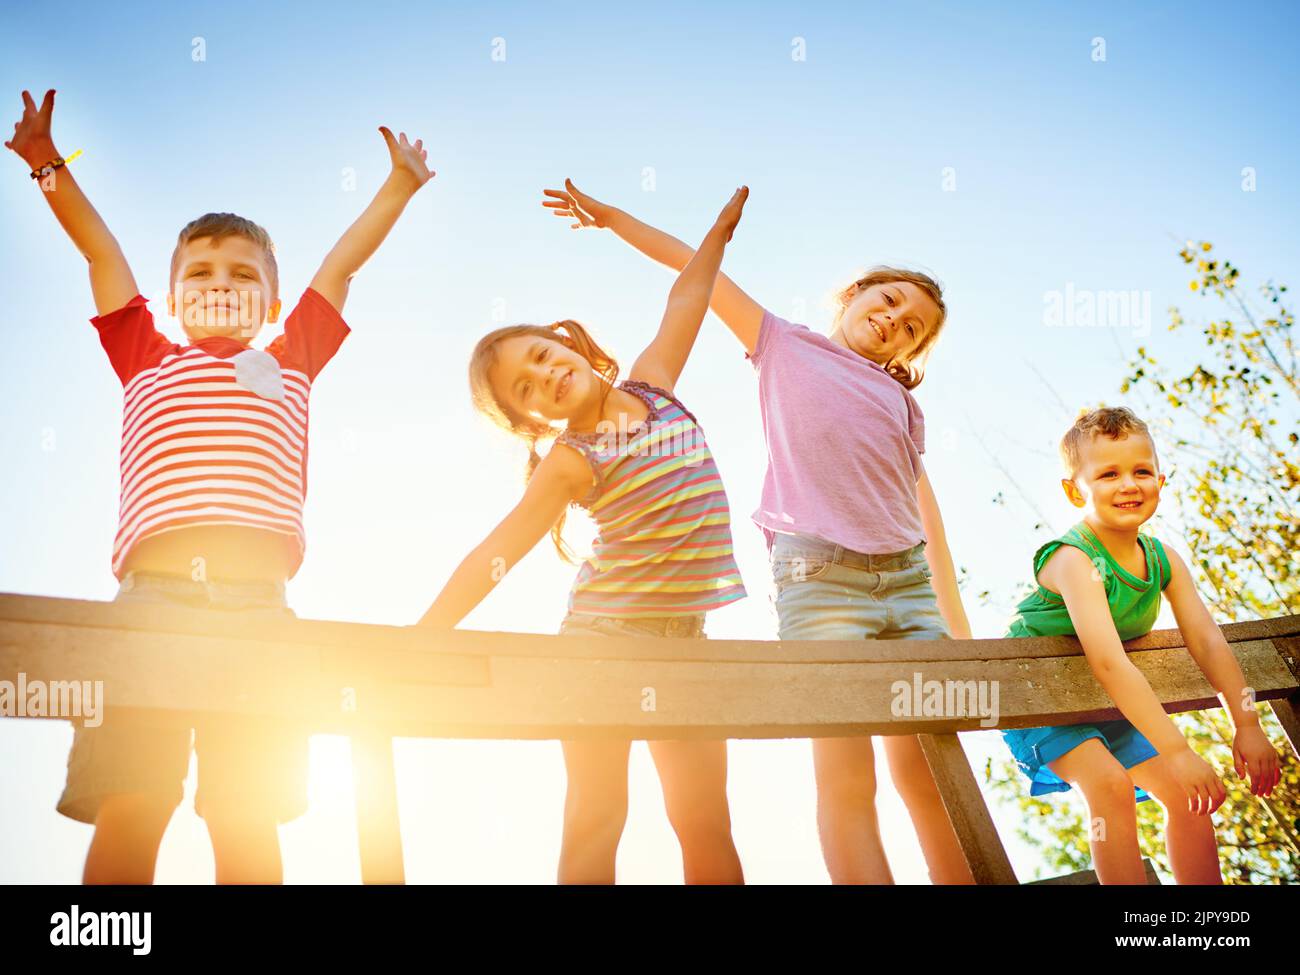 Time for some endless fun in the sun. Portrait of a group of little children playing together outdoors. Stock Photo